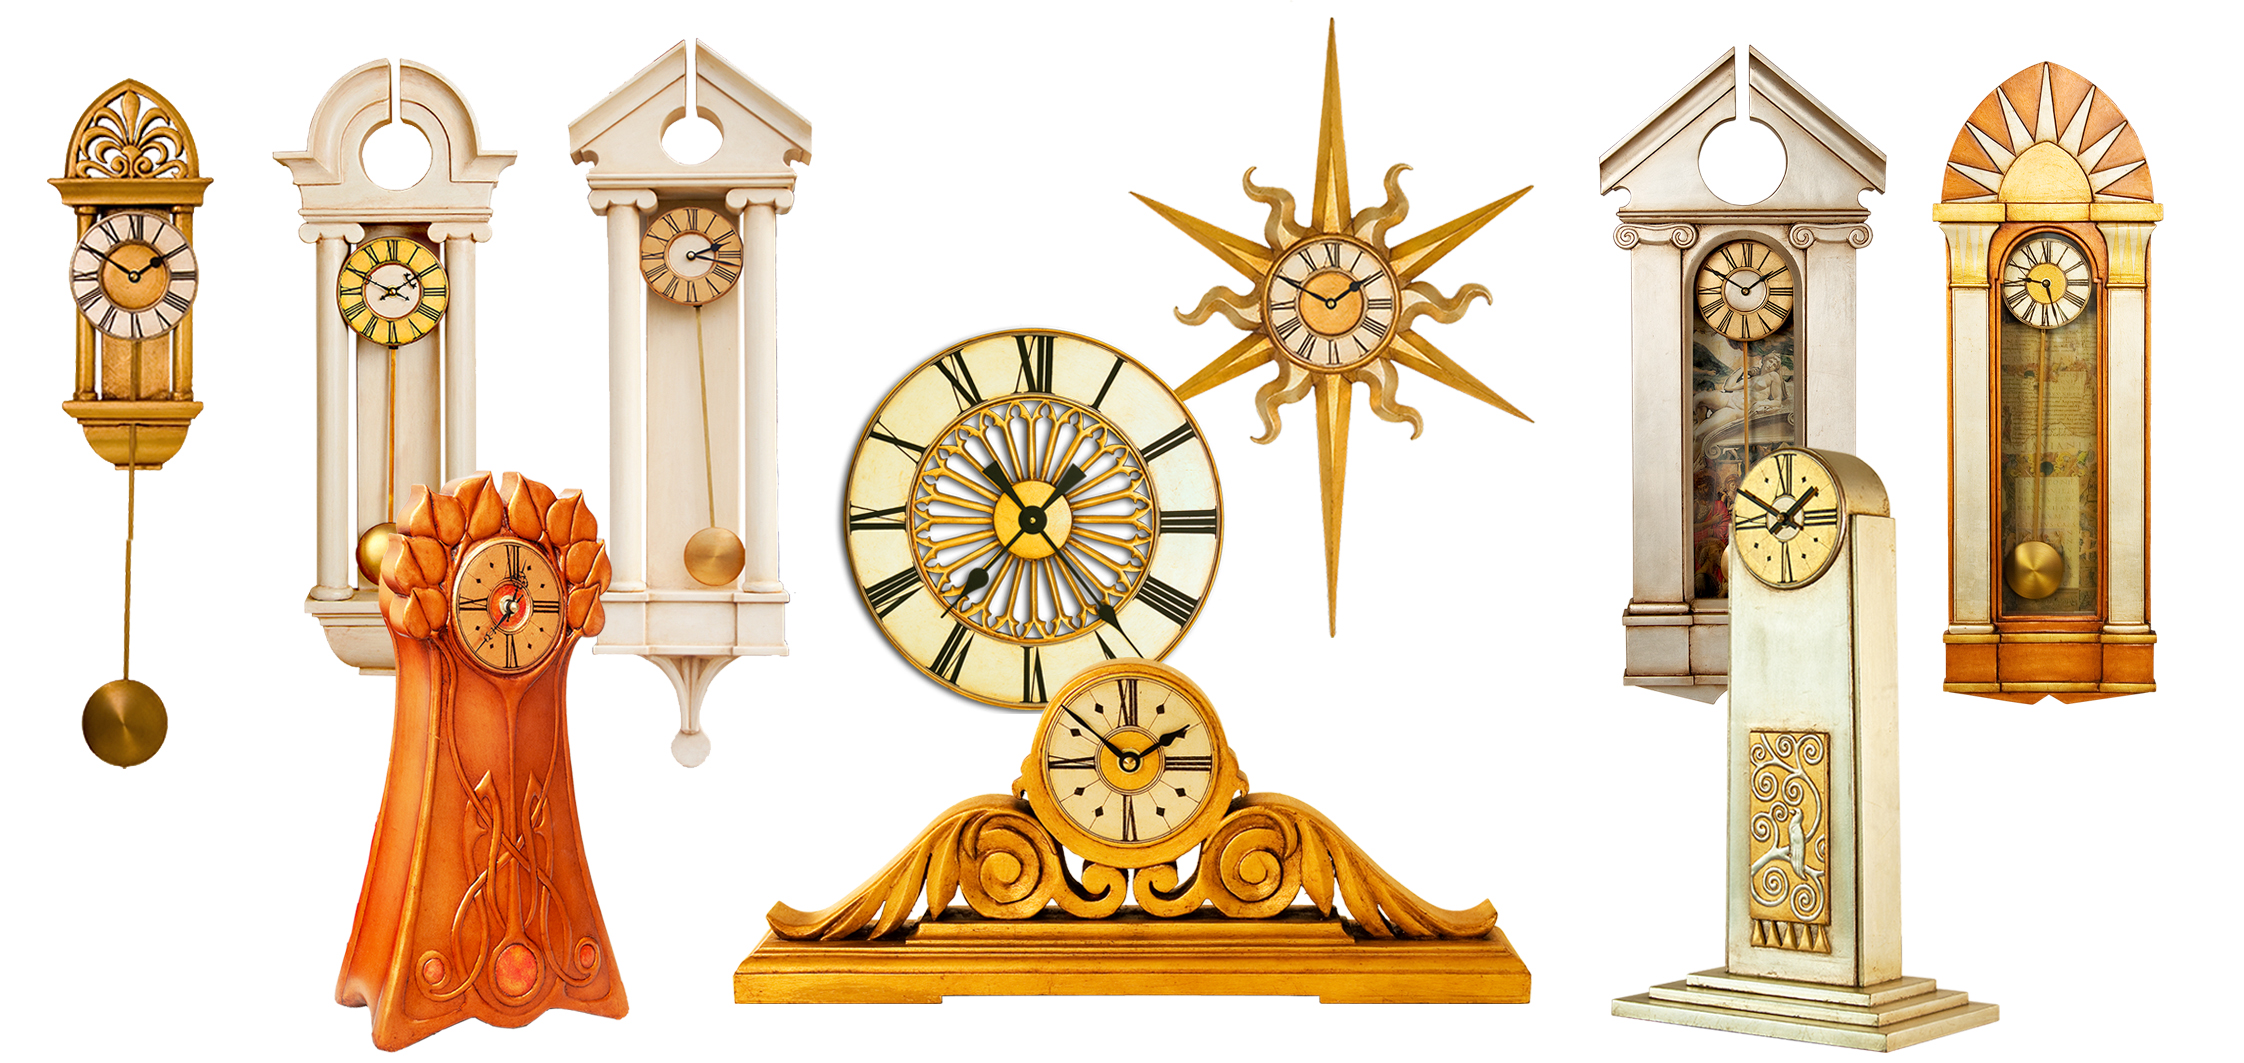 Stunning selection from my handmade vintage clock collection